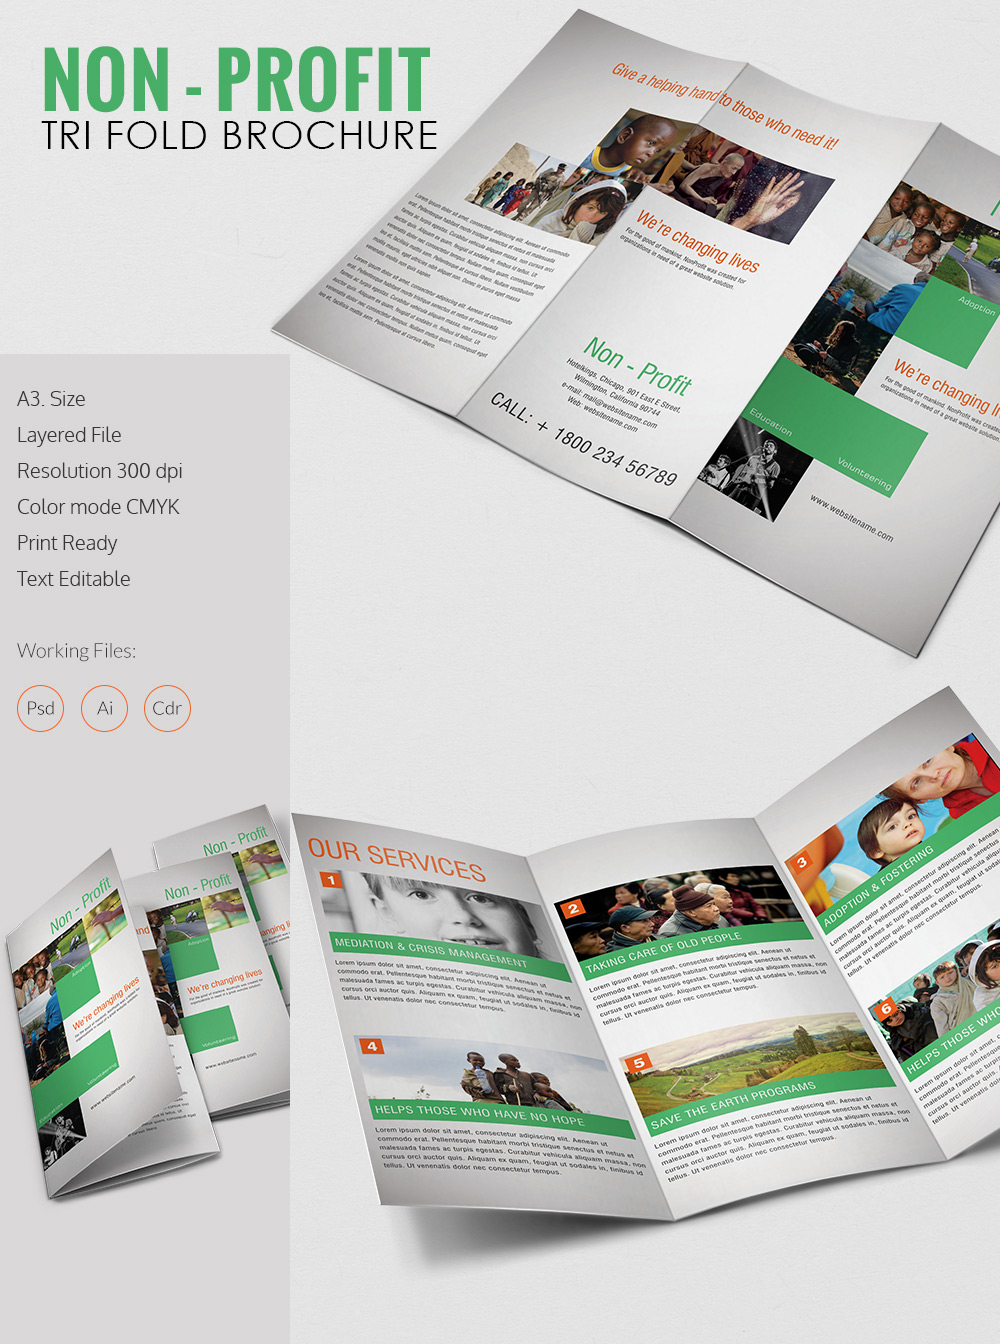 Amazing Non Profit A3 Tri Fold Brochure Template Download With Ngo Brochure Templates